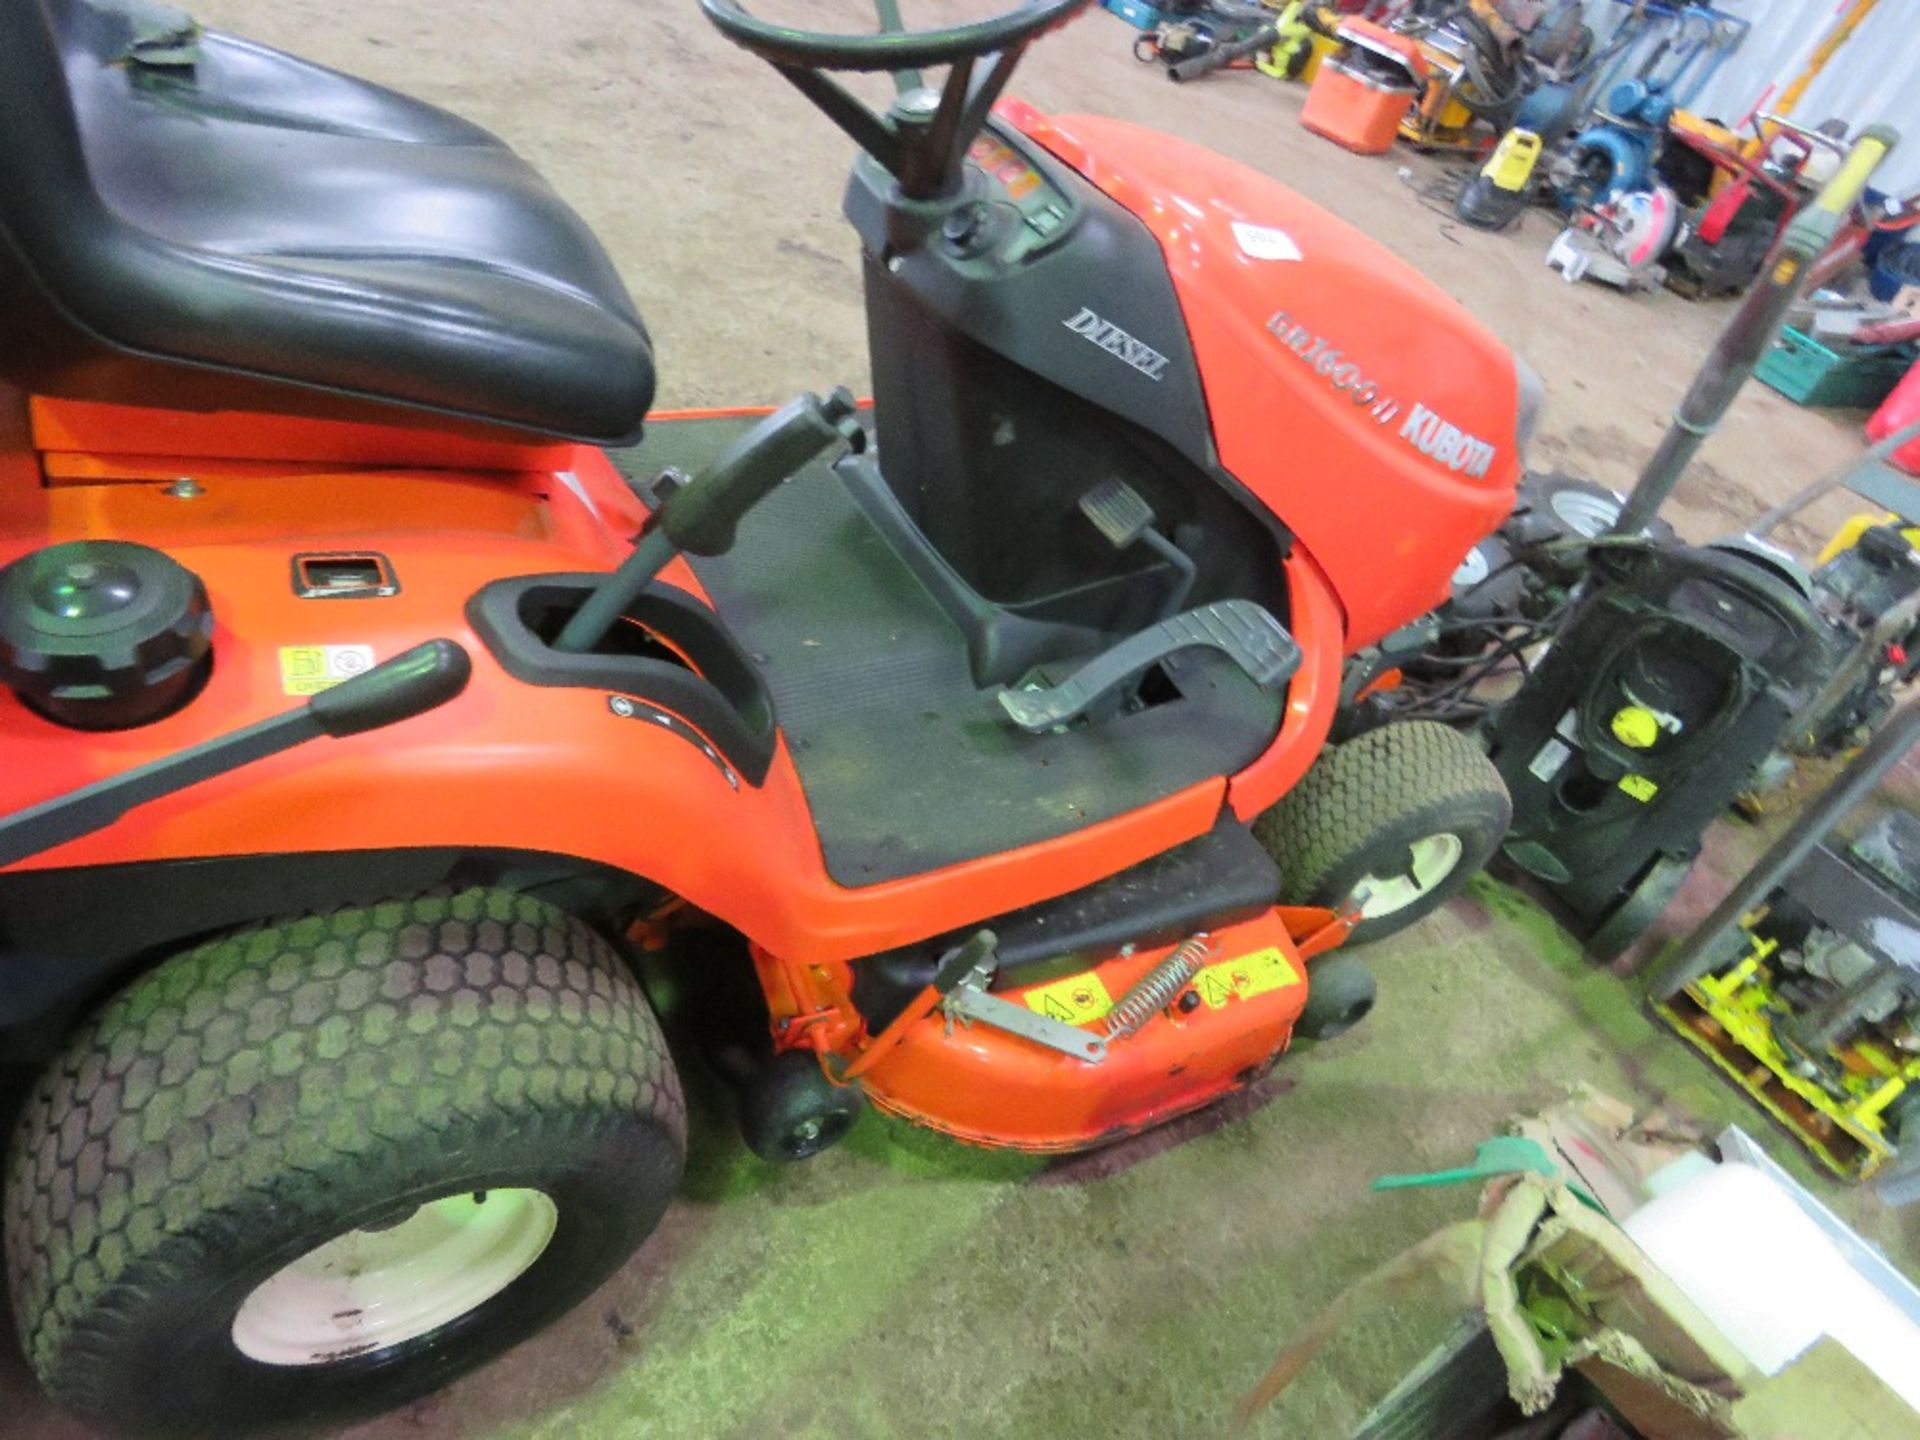 KUBOTA GR1600-II DIESEL RIDE ON MOWER WITH REAR COLLECTOR PLUS DISCHARGE CHUTE. SN:30142. WHEN TESTE - Image 9 of 9